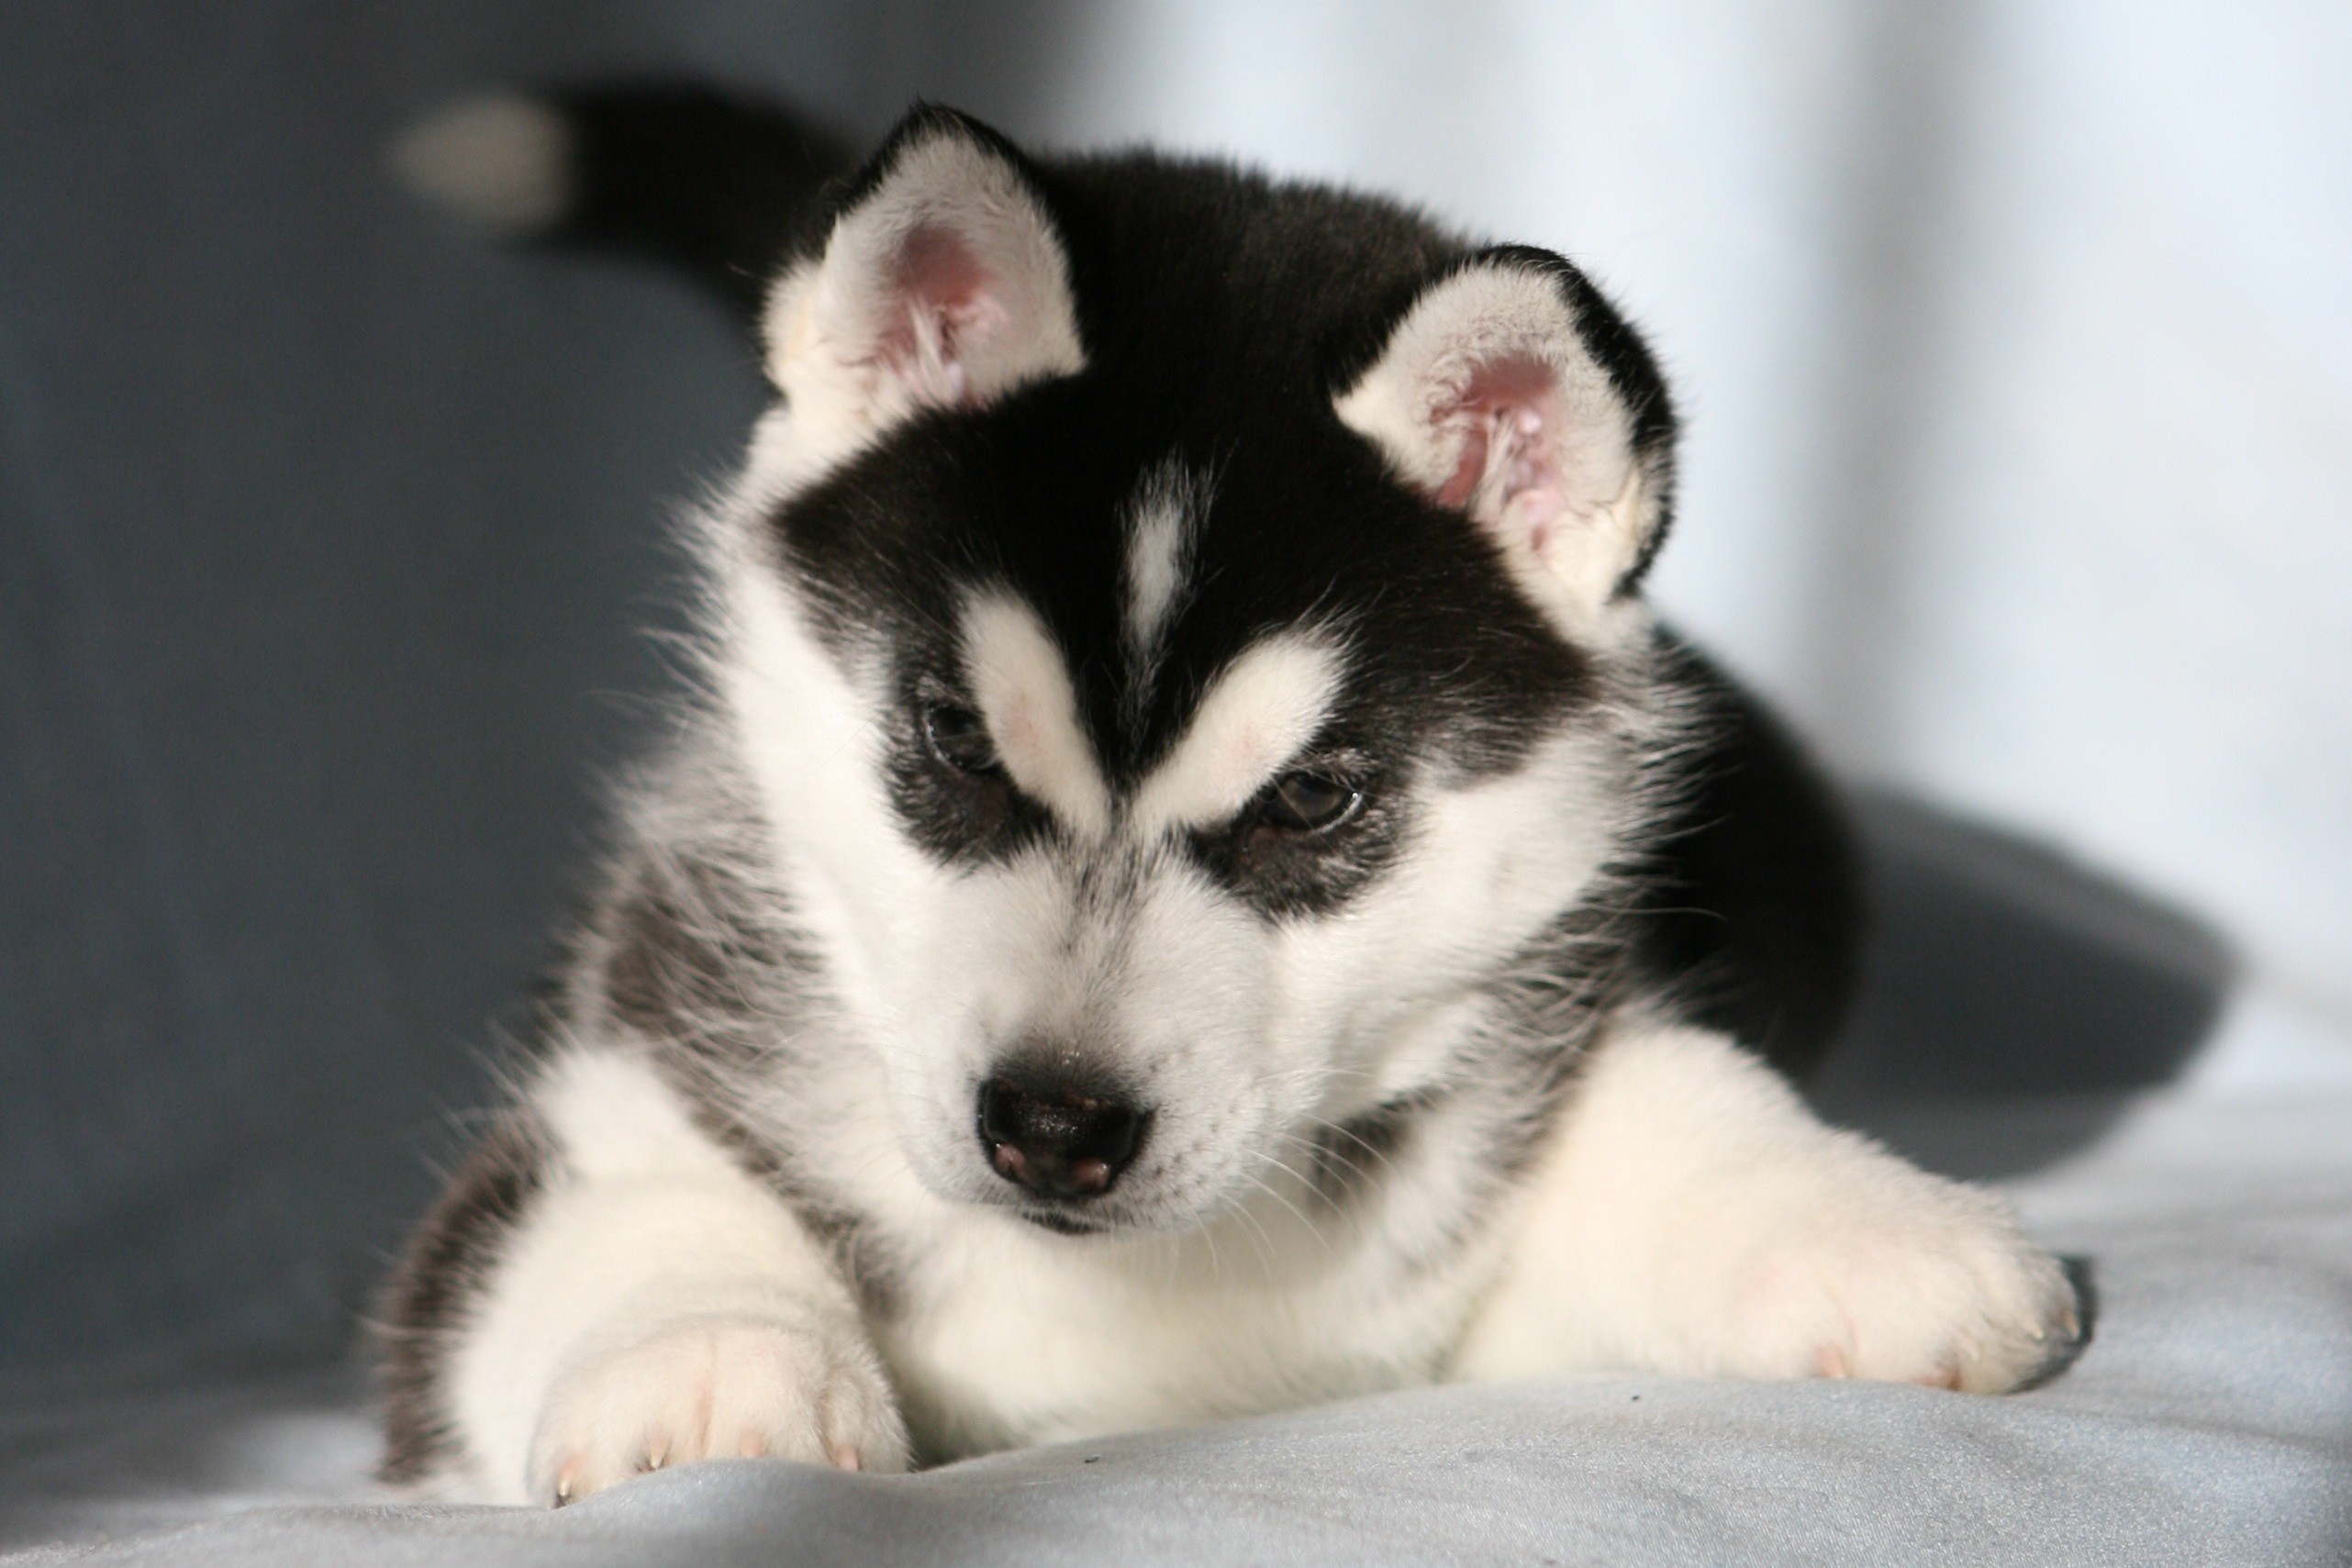 Husky Puppy Wallpaper Iphone with High Definition Wallpaper px  756.01 KB Animals Iphone Cute Husky